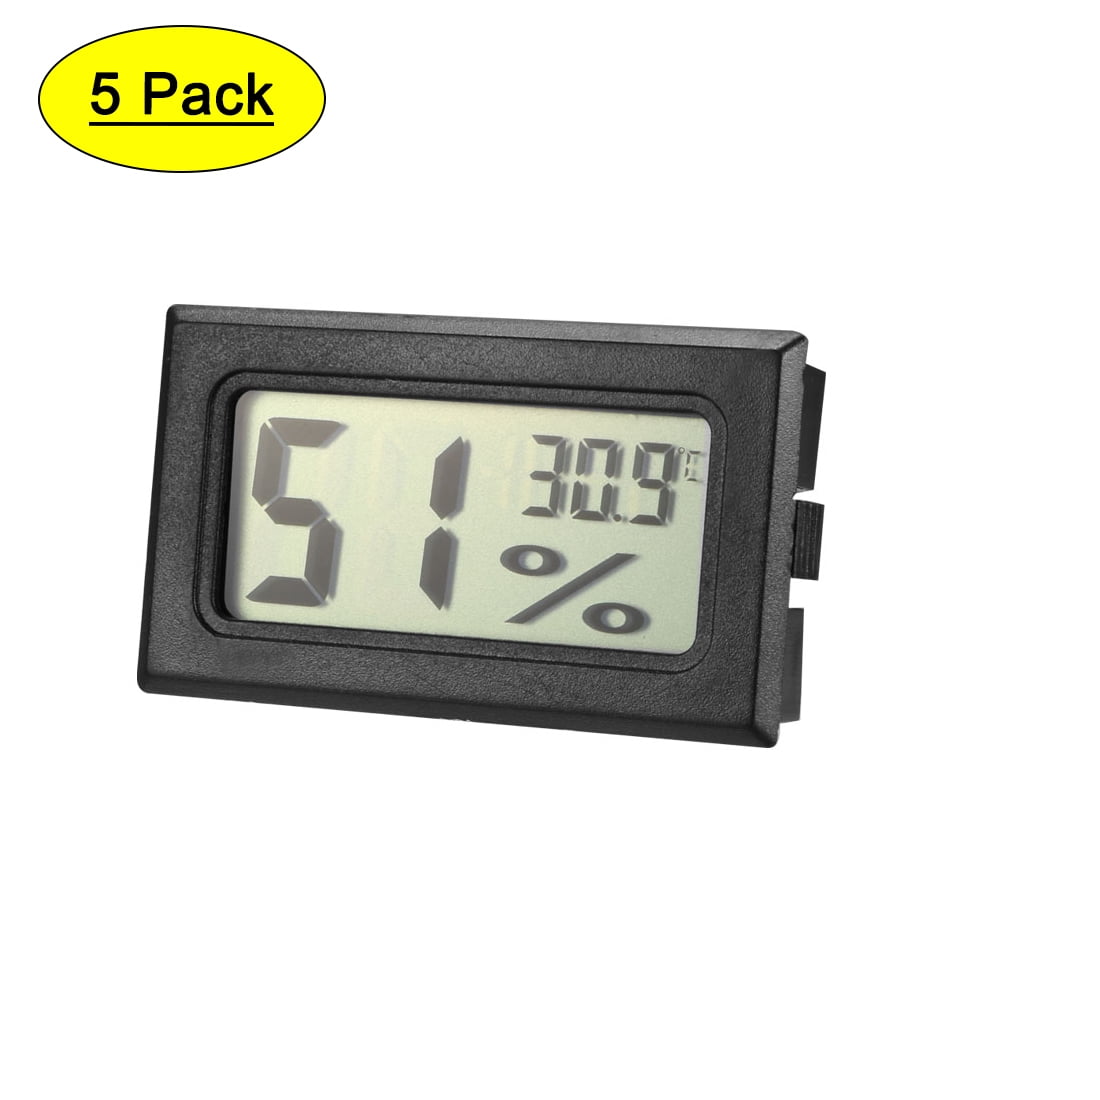 Measures Indoor Air Humidity Levels HG050 Humidity & Temperature Monitor 